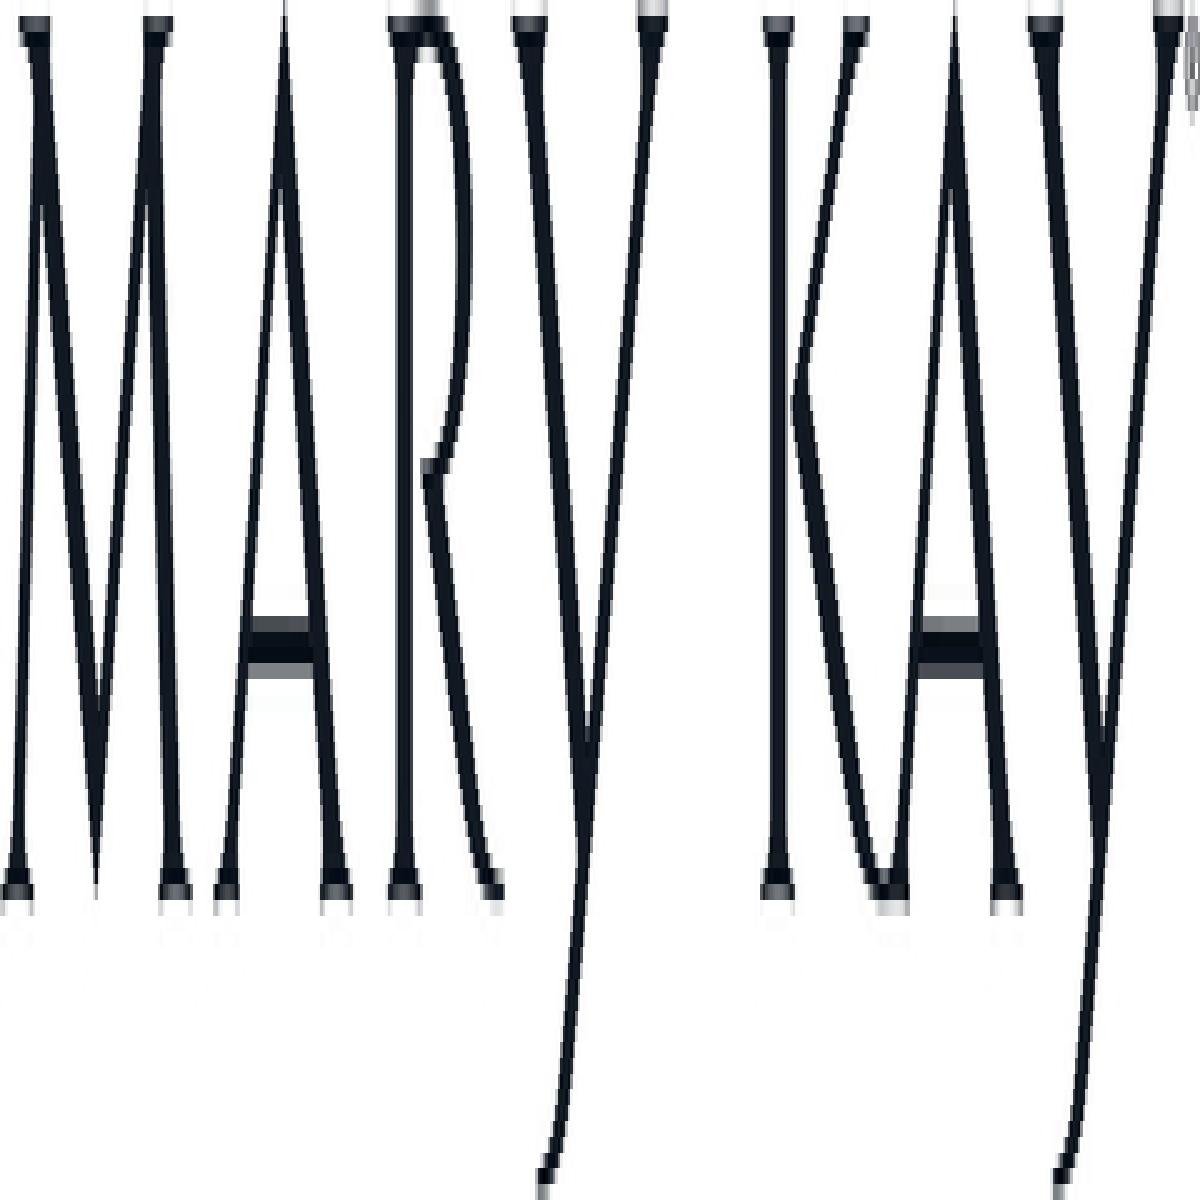 Feeling 22 Mary Kay Inc Announces Awards Milestones and Accomplishments From First Half of the Year